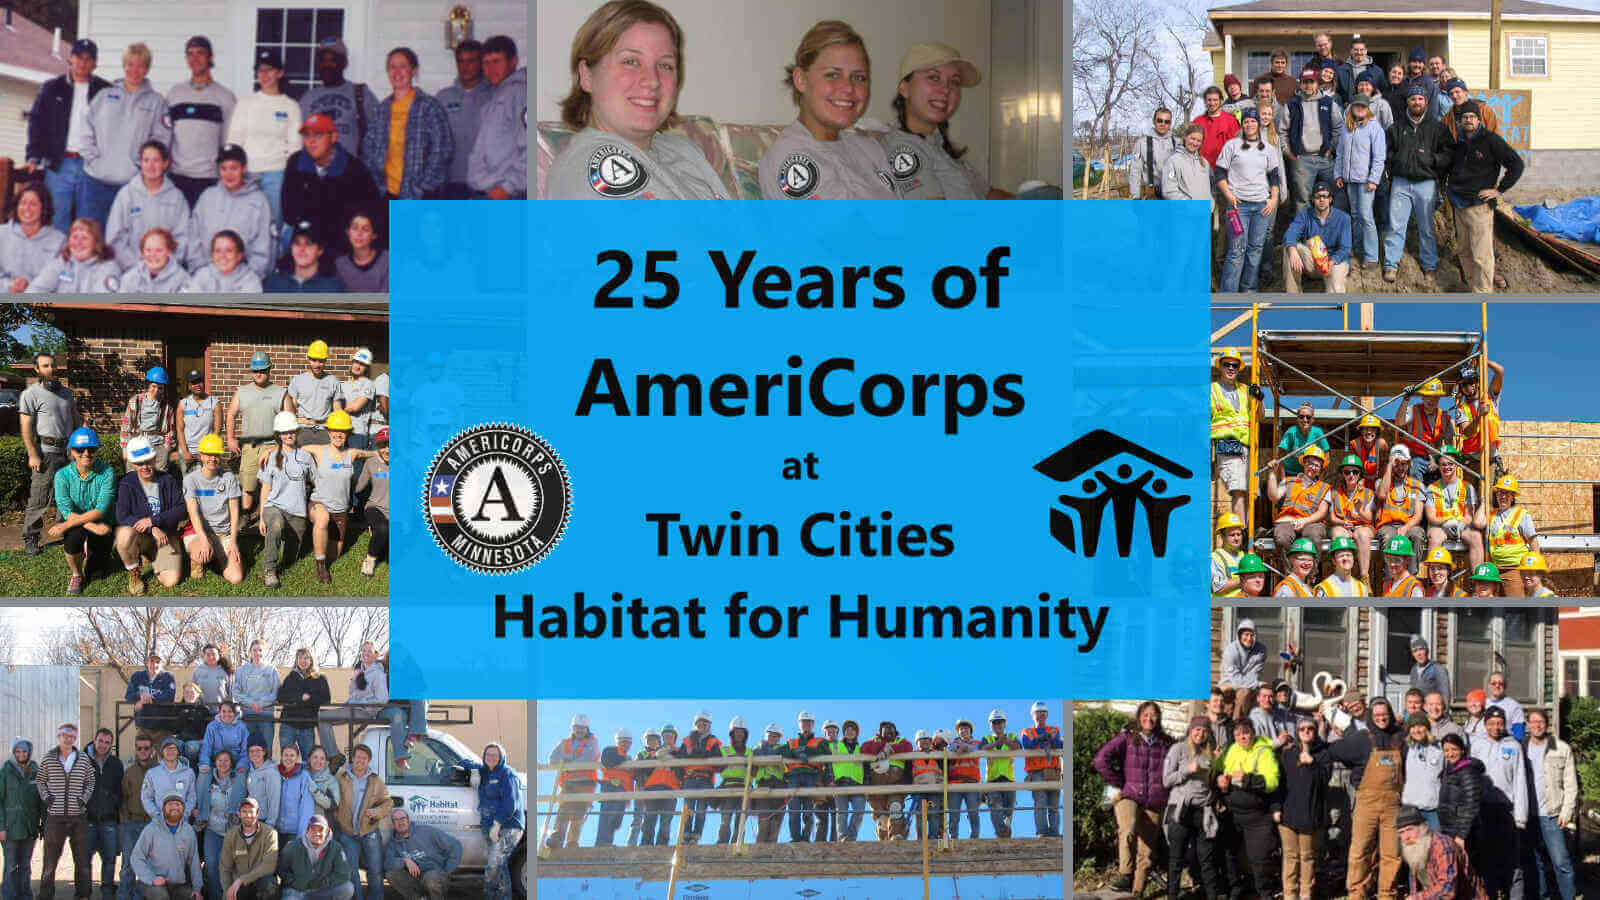 A bright blue box centered with black text that says "25 Years of AmeriCorps at Twin Cities Habitat for Humanity" with the AmeriCorps Minnesota logo and the Habitat logo flanking it. The blue box is overlaying 8 images of AmeriCorps members in group photos.